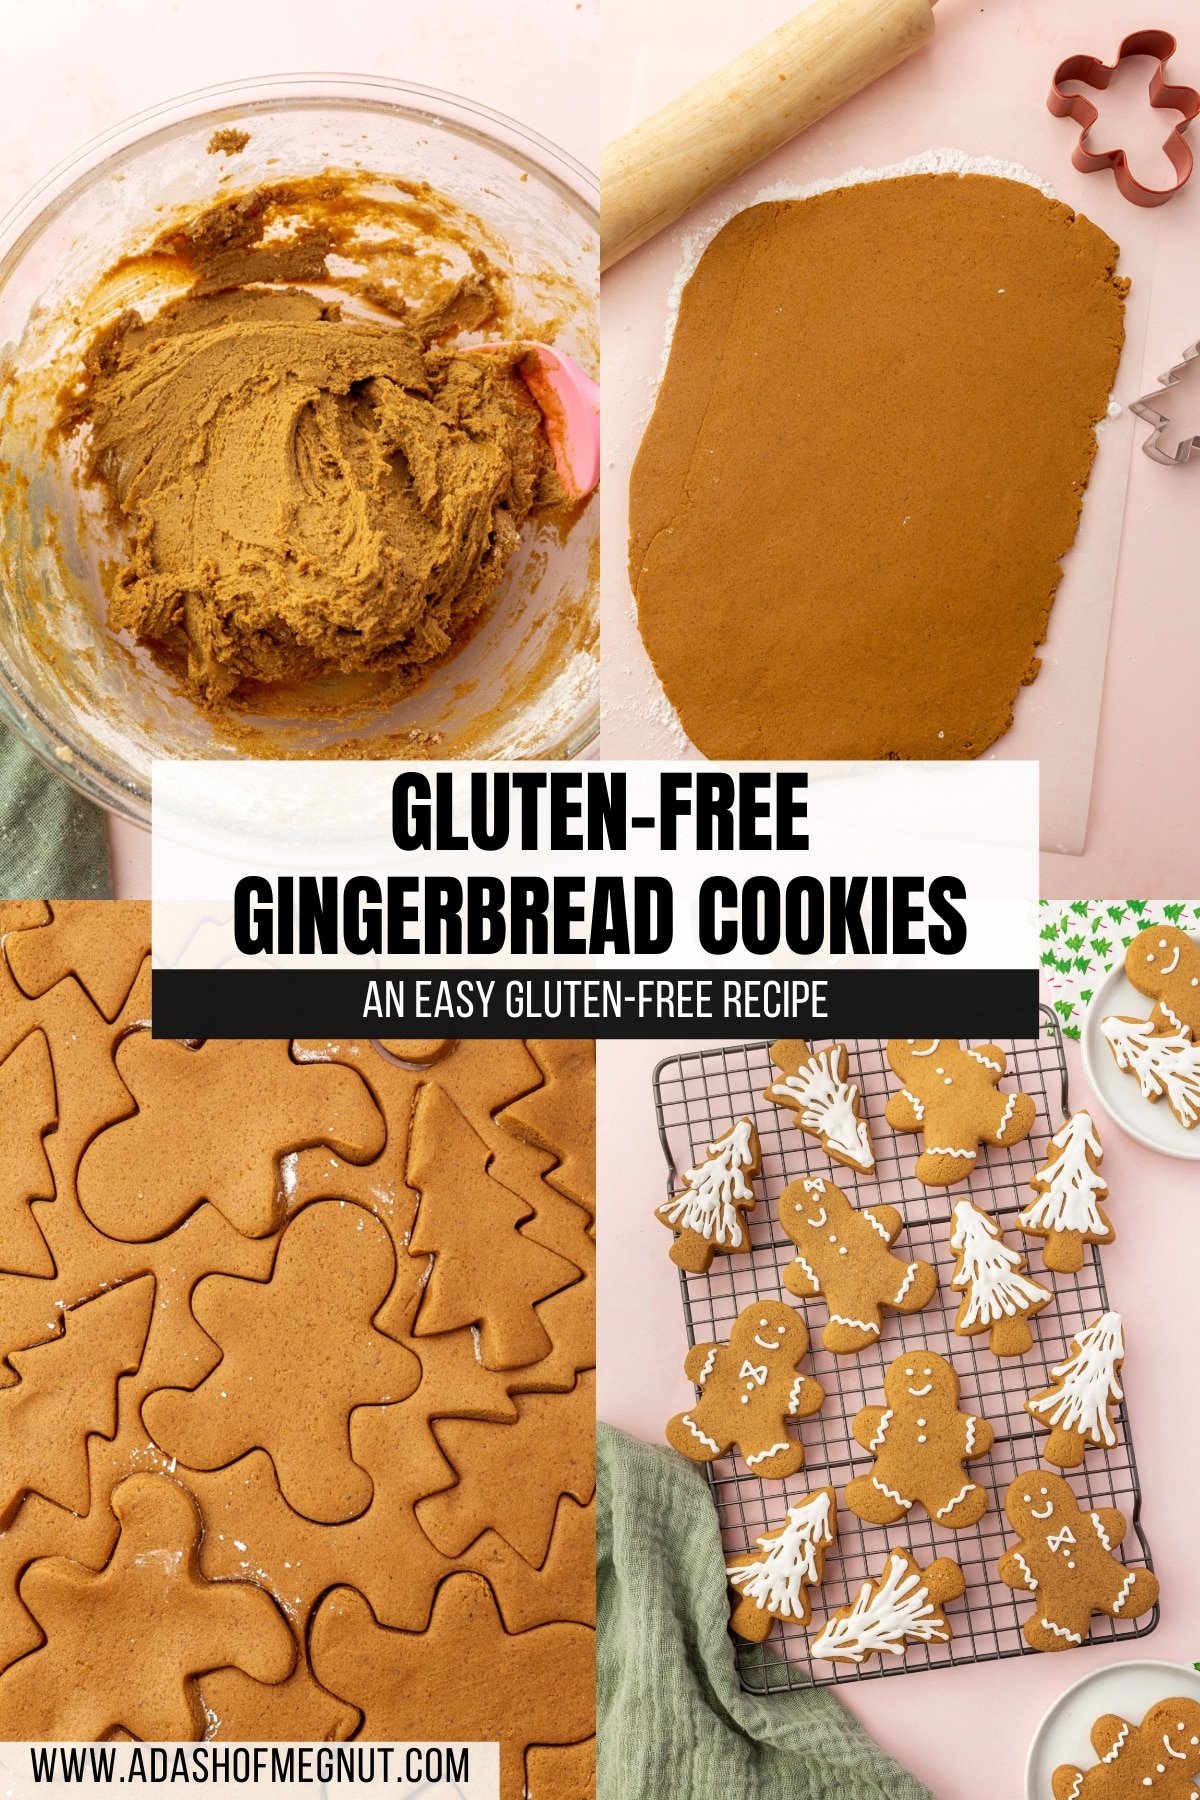 A four photo collage showing the process of making gluten-free gingerbread cookies. Photo 1: A glass mixing bowl with gluten-free gingerbread cookie dough in it. Photo 2: Gluten-free gingerbread cookie dough rolled out on parchment paper. Photo 3: Gluten-free gingerbread cookie dough rolled out on parchment paper with gingerbread men and Christmas trees cut out of them. Photo 4: A cooling rack with gluten-free gingerbread men and gingerbread christmas tree cookies on it frosted with white royal icing.